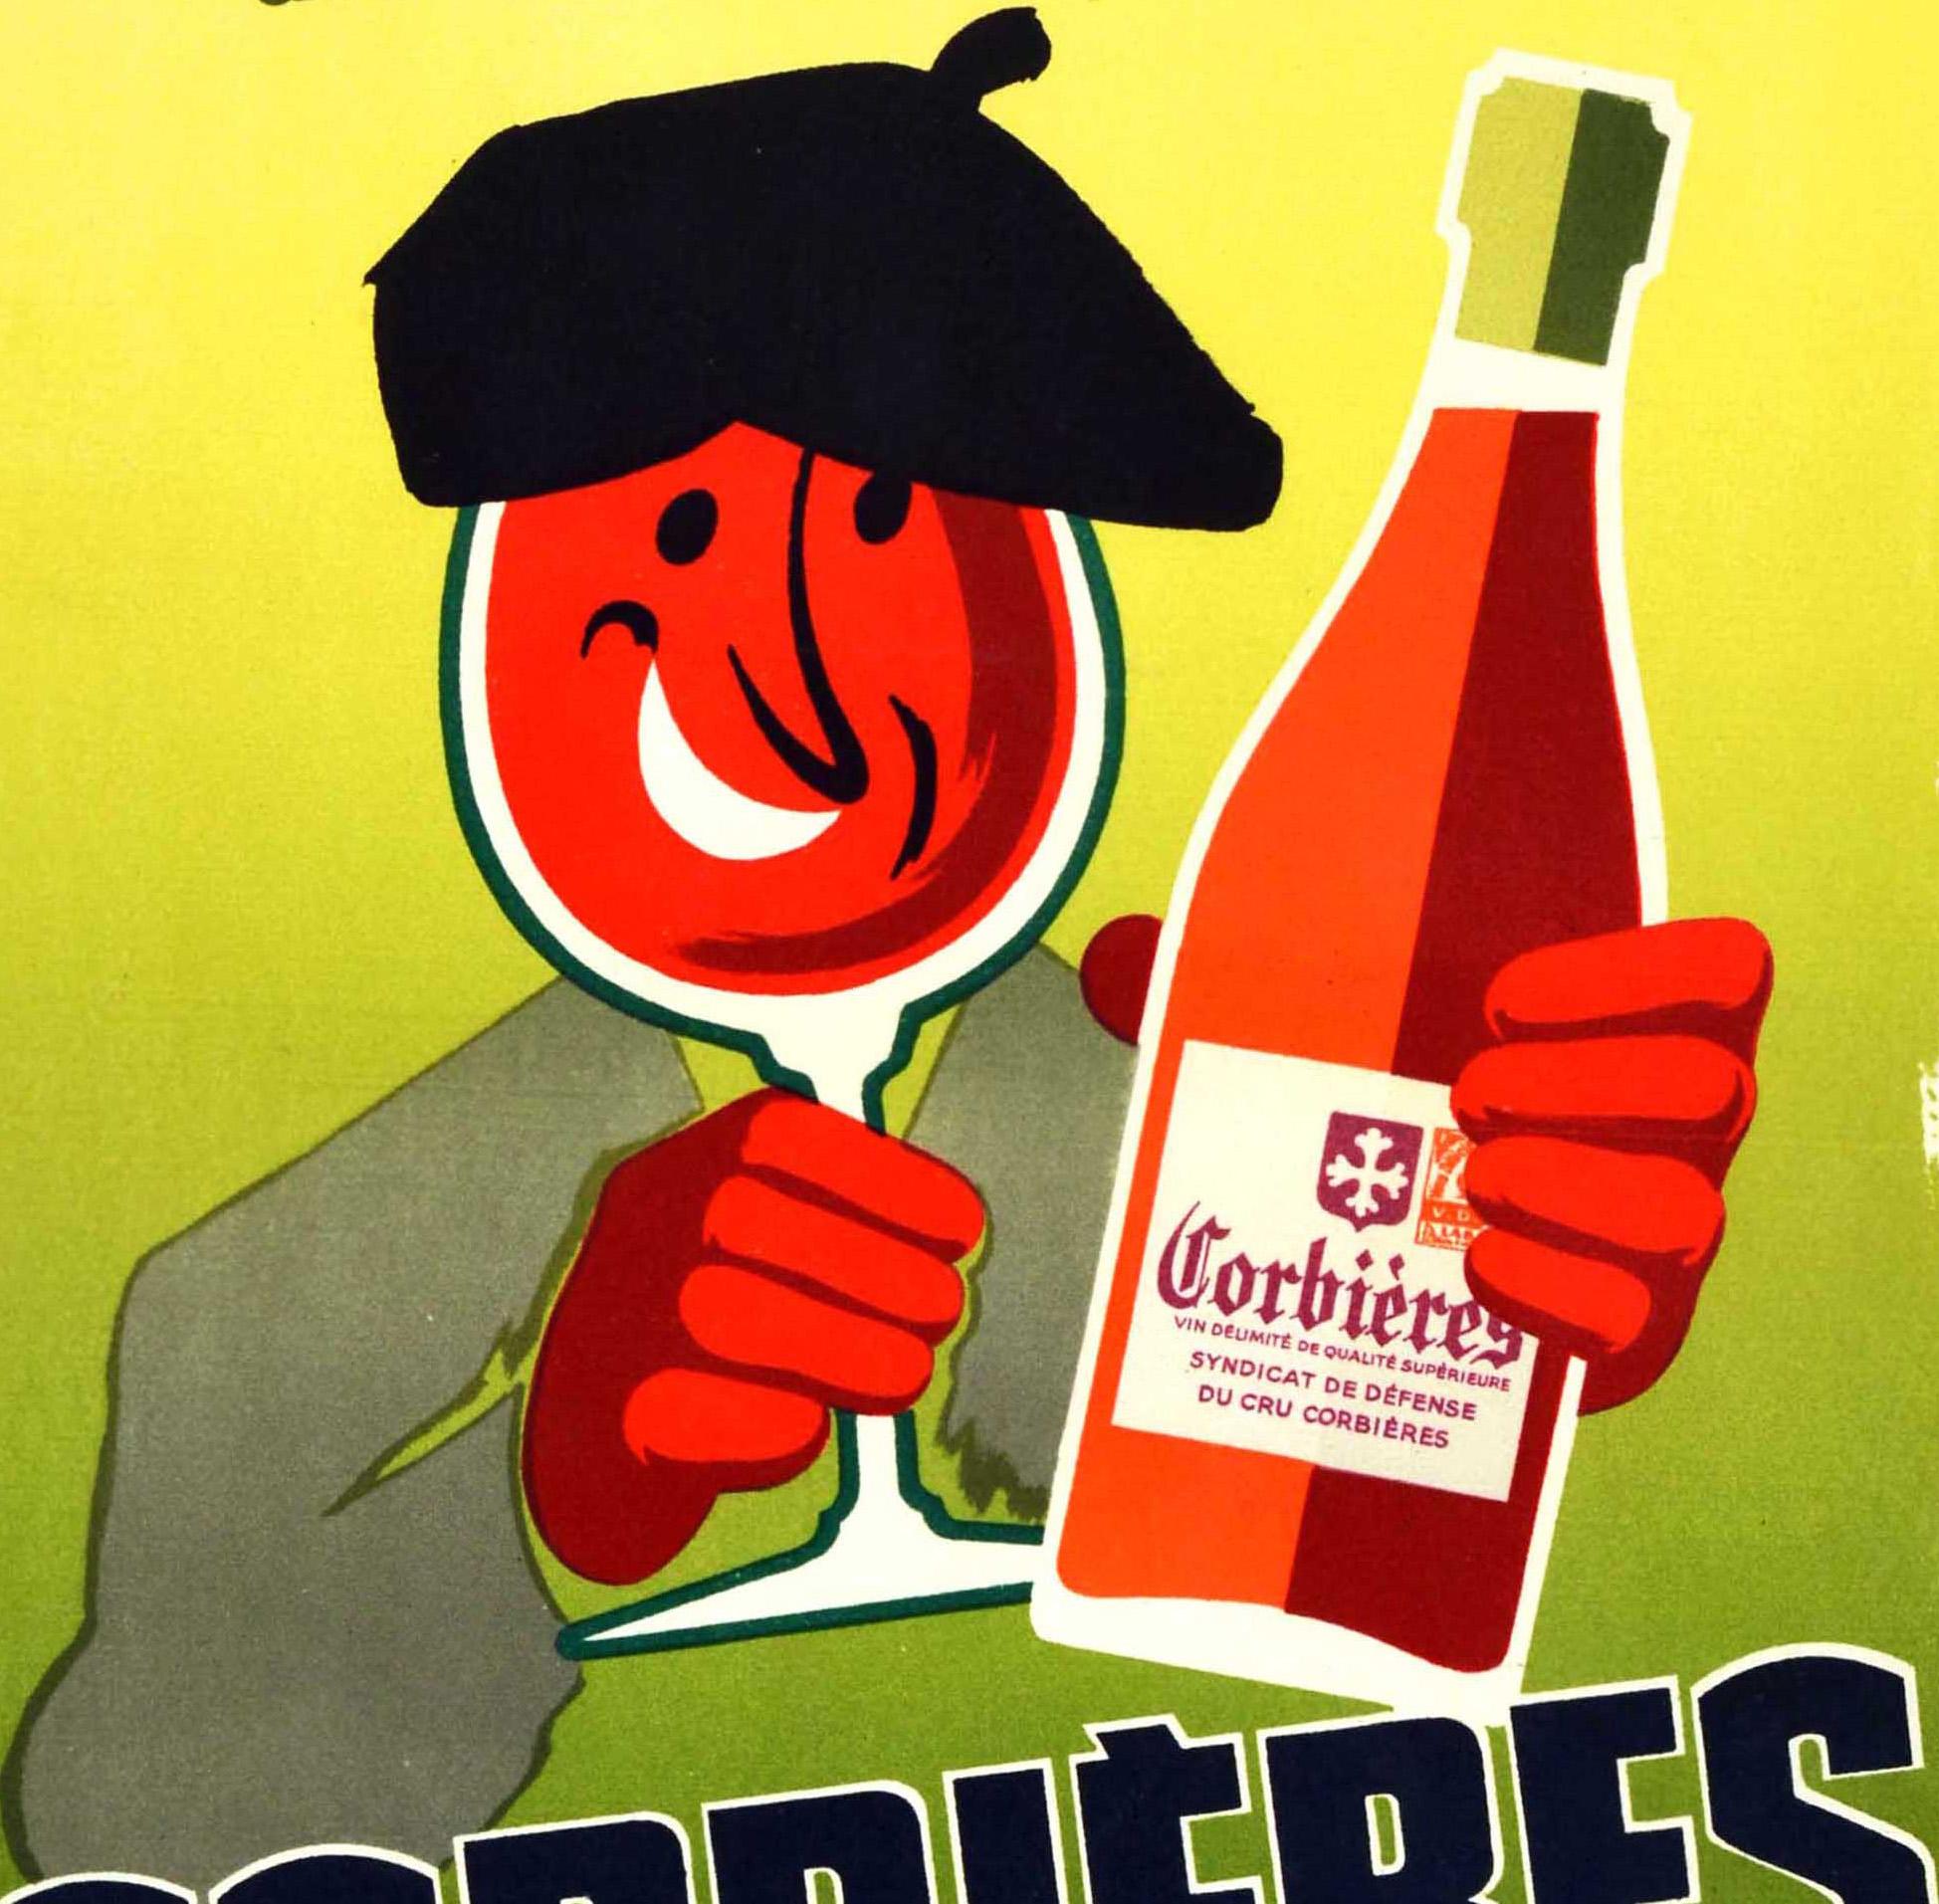 Original vintage drink poster for Corbieres wine from the Languedoc Roussillon region of France - Un cru qui a de l'accent / A cru of note - featuring a colourful and fun design depicting a smiling man wearing a beret hat and holding up a wine glass